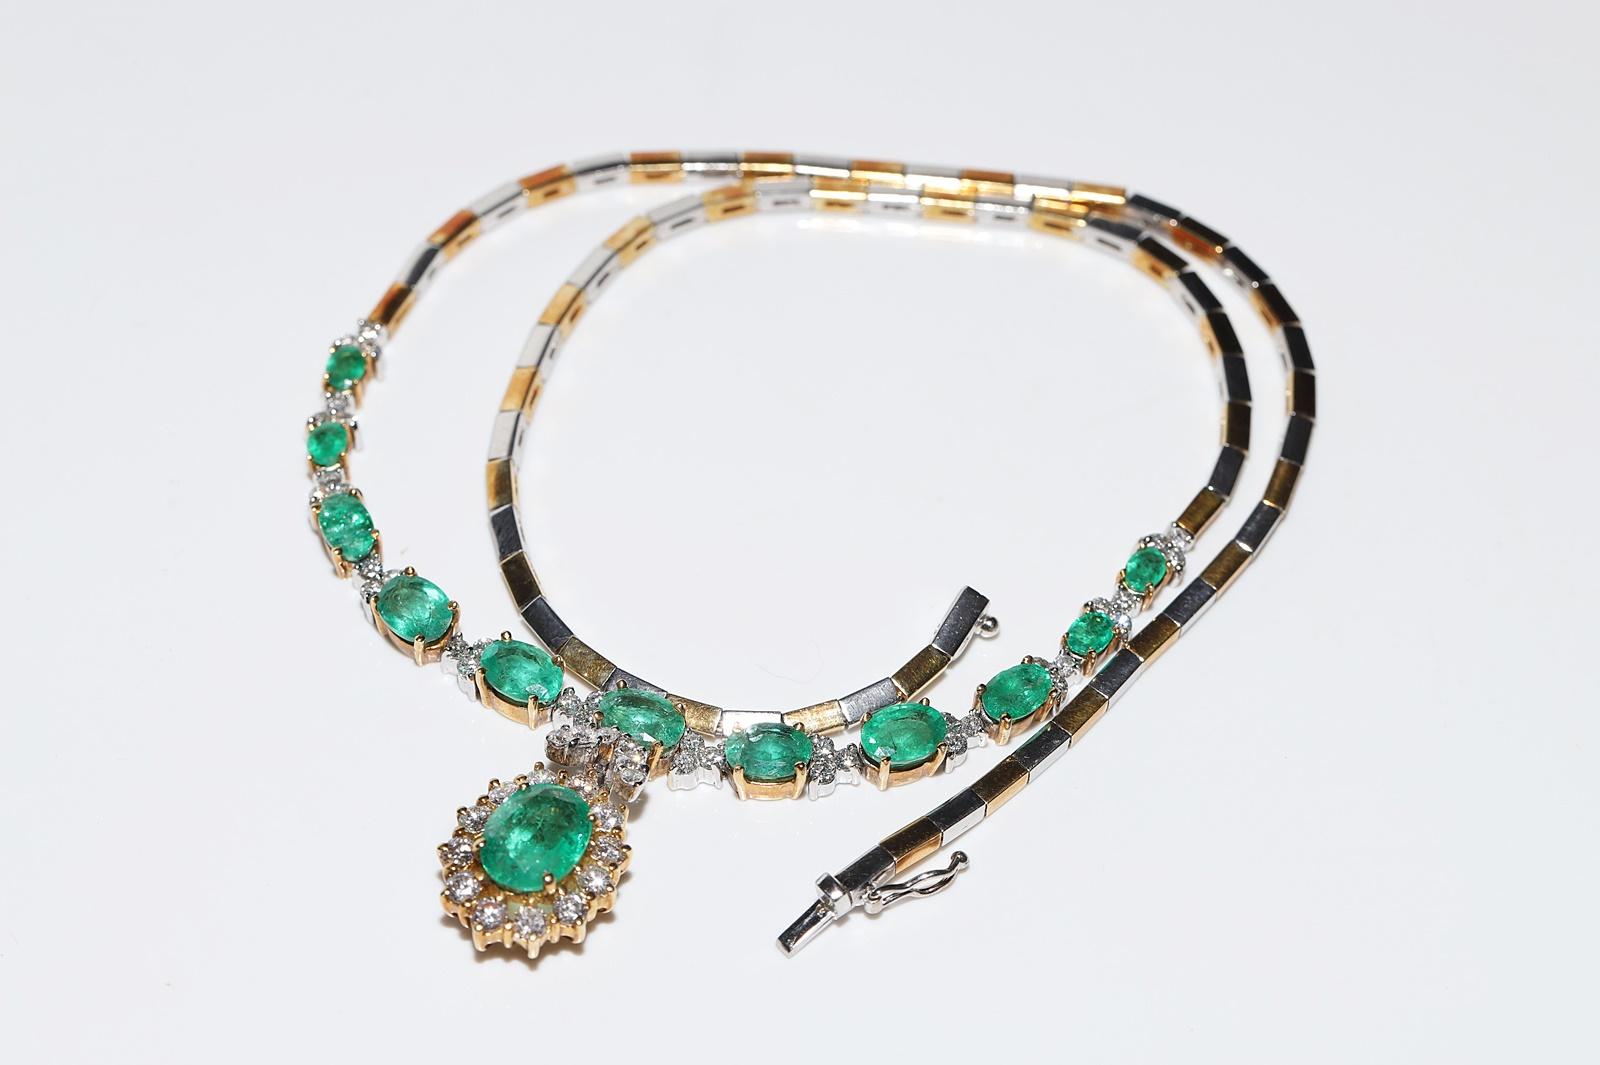 Vintage Circa 1990s 18k Gold Natural Diamond And Emerald Decorated Necklace For Sale 8